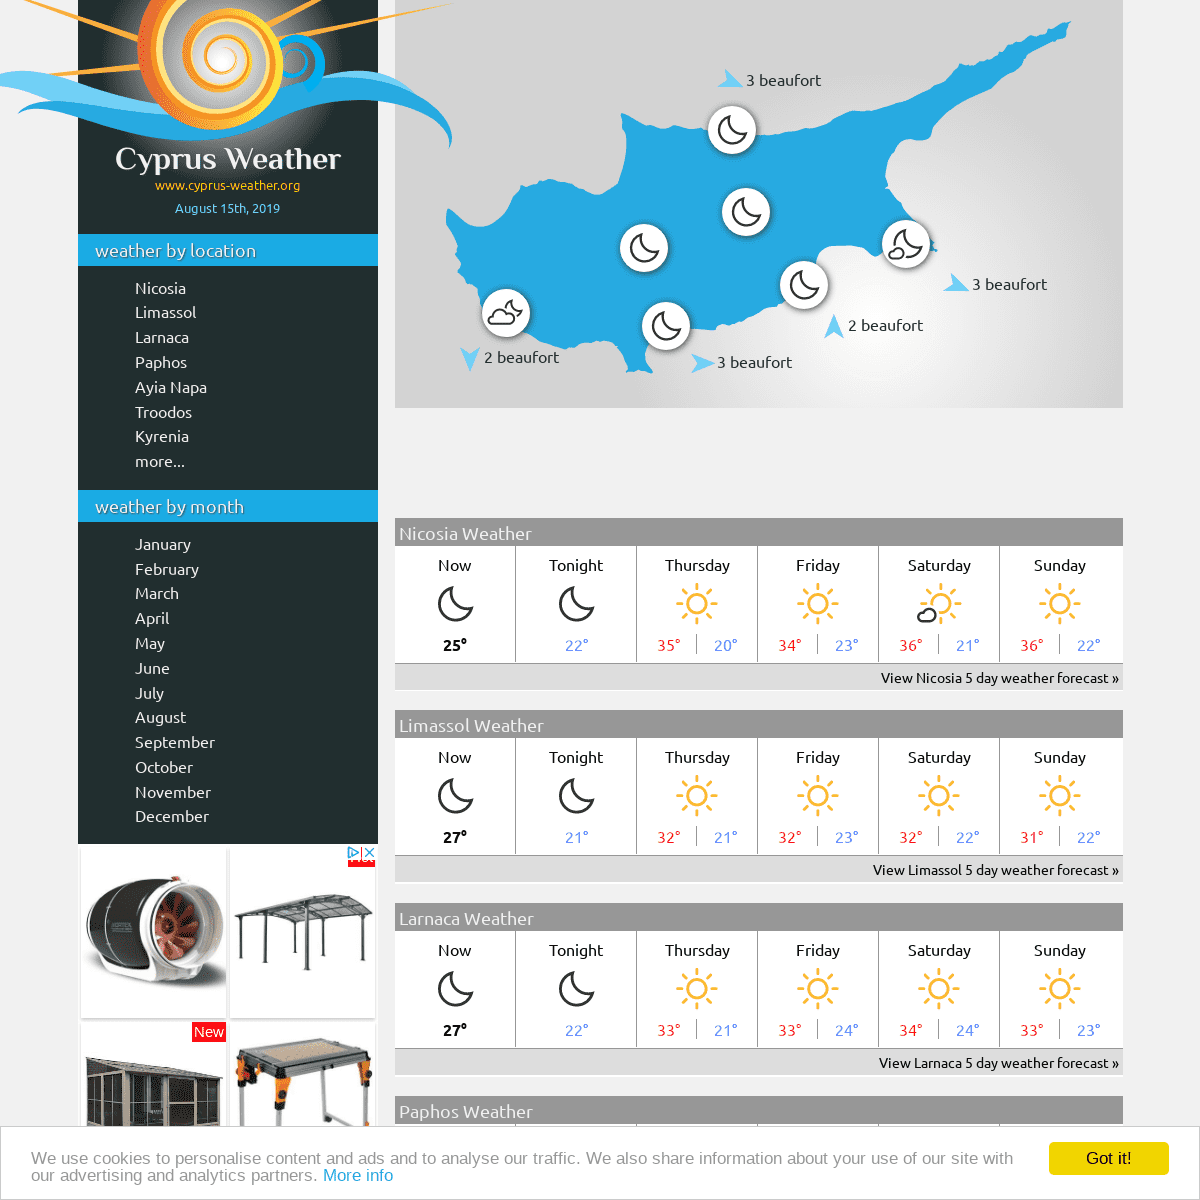 Cyprus Weather Forecast. Weather in Cyprus